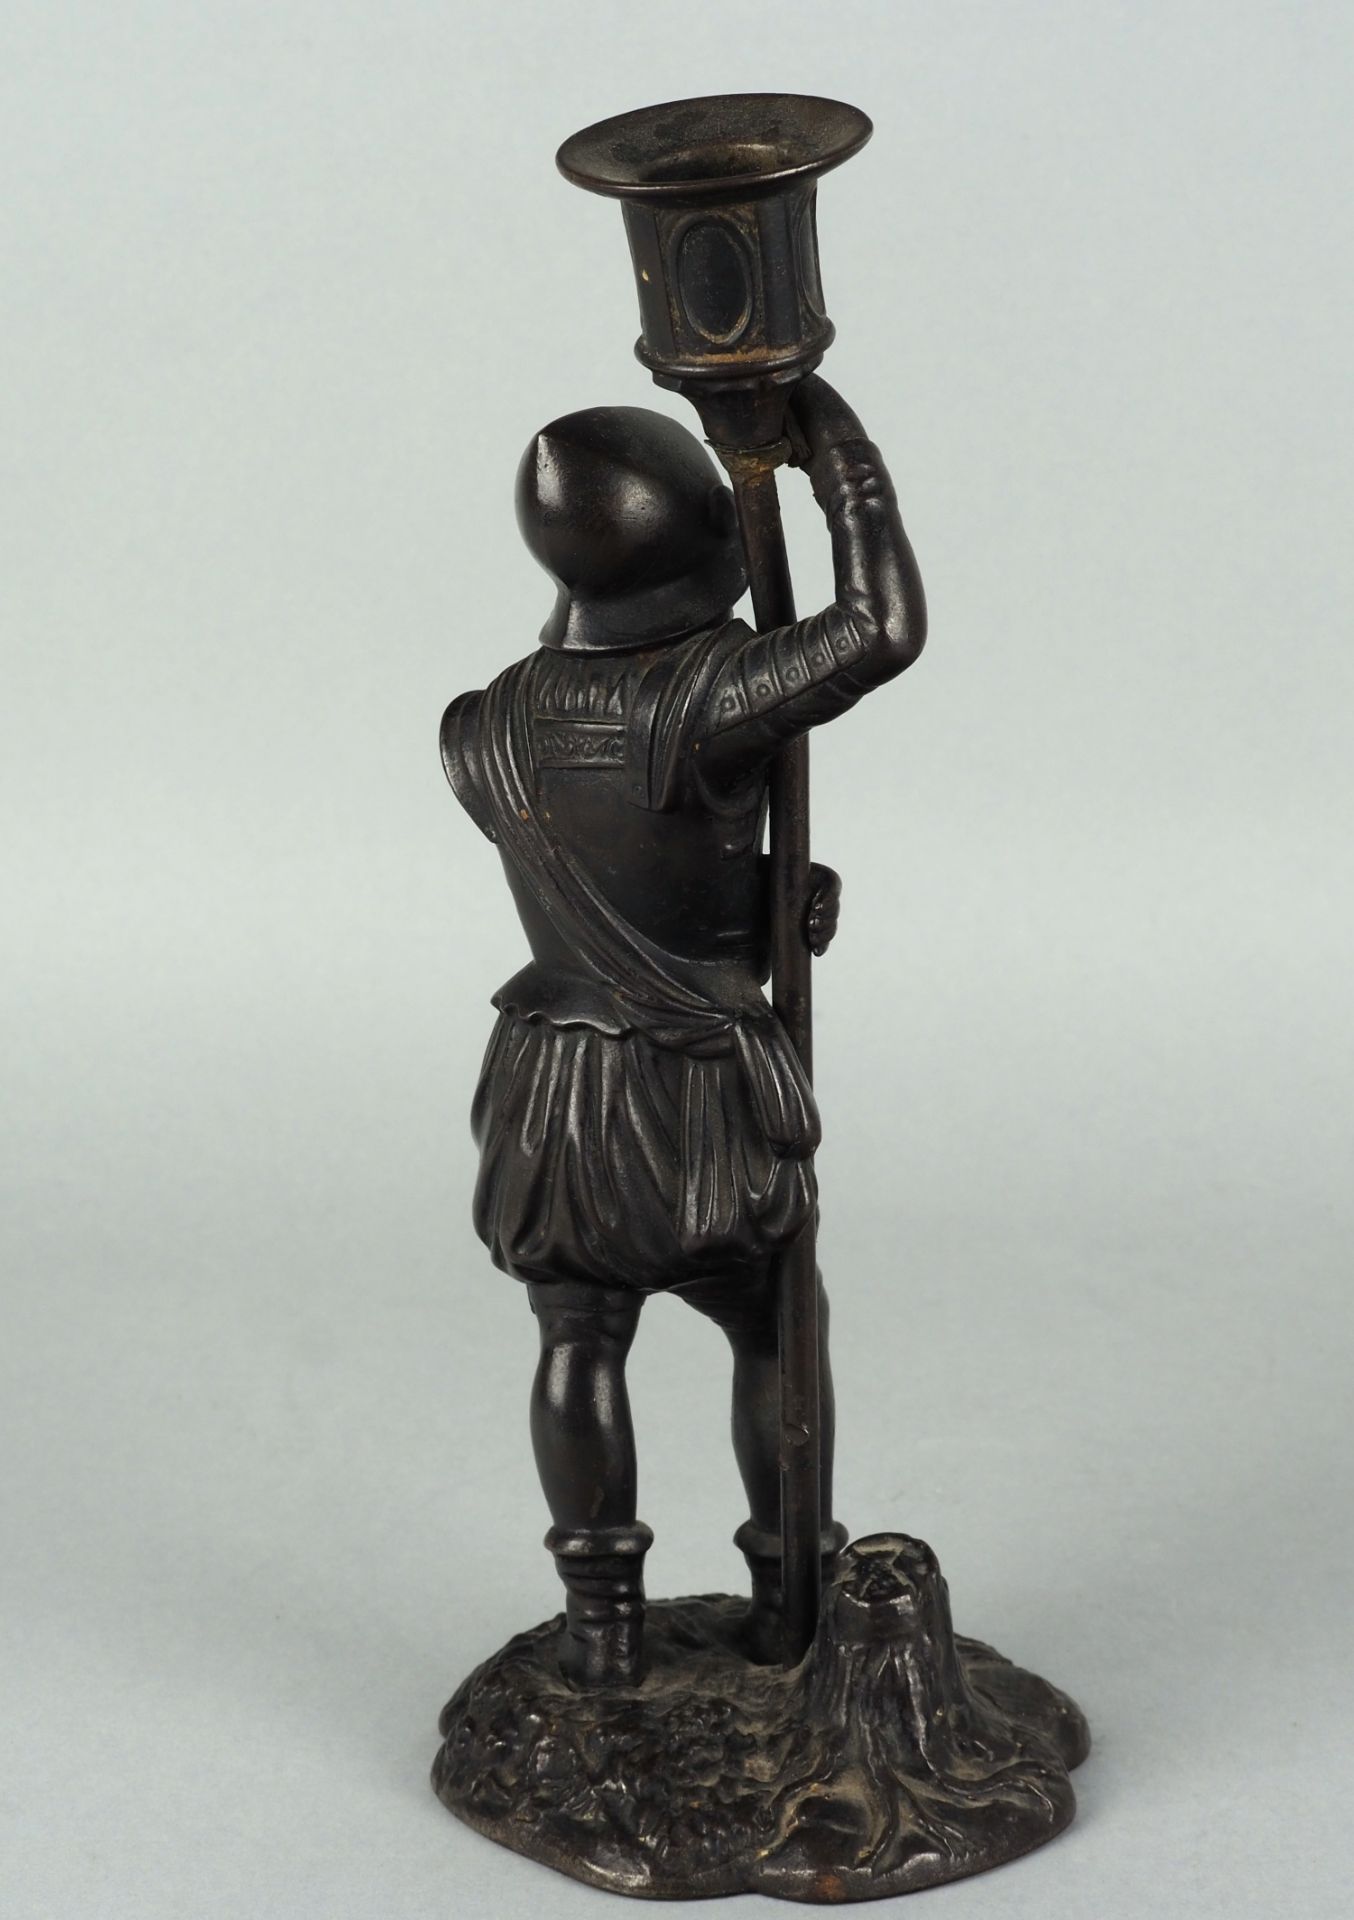 Pair of guardian sculptures as candlesticks made of cast iron, around 1850 - Image 3 of 6